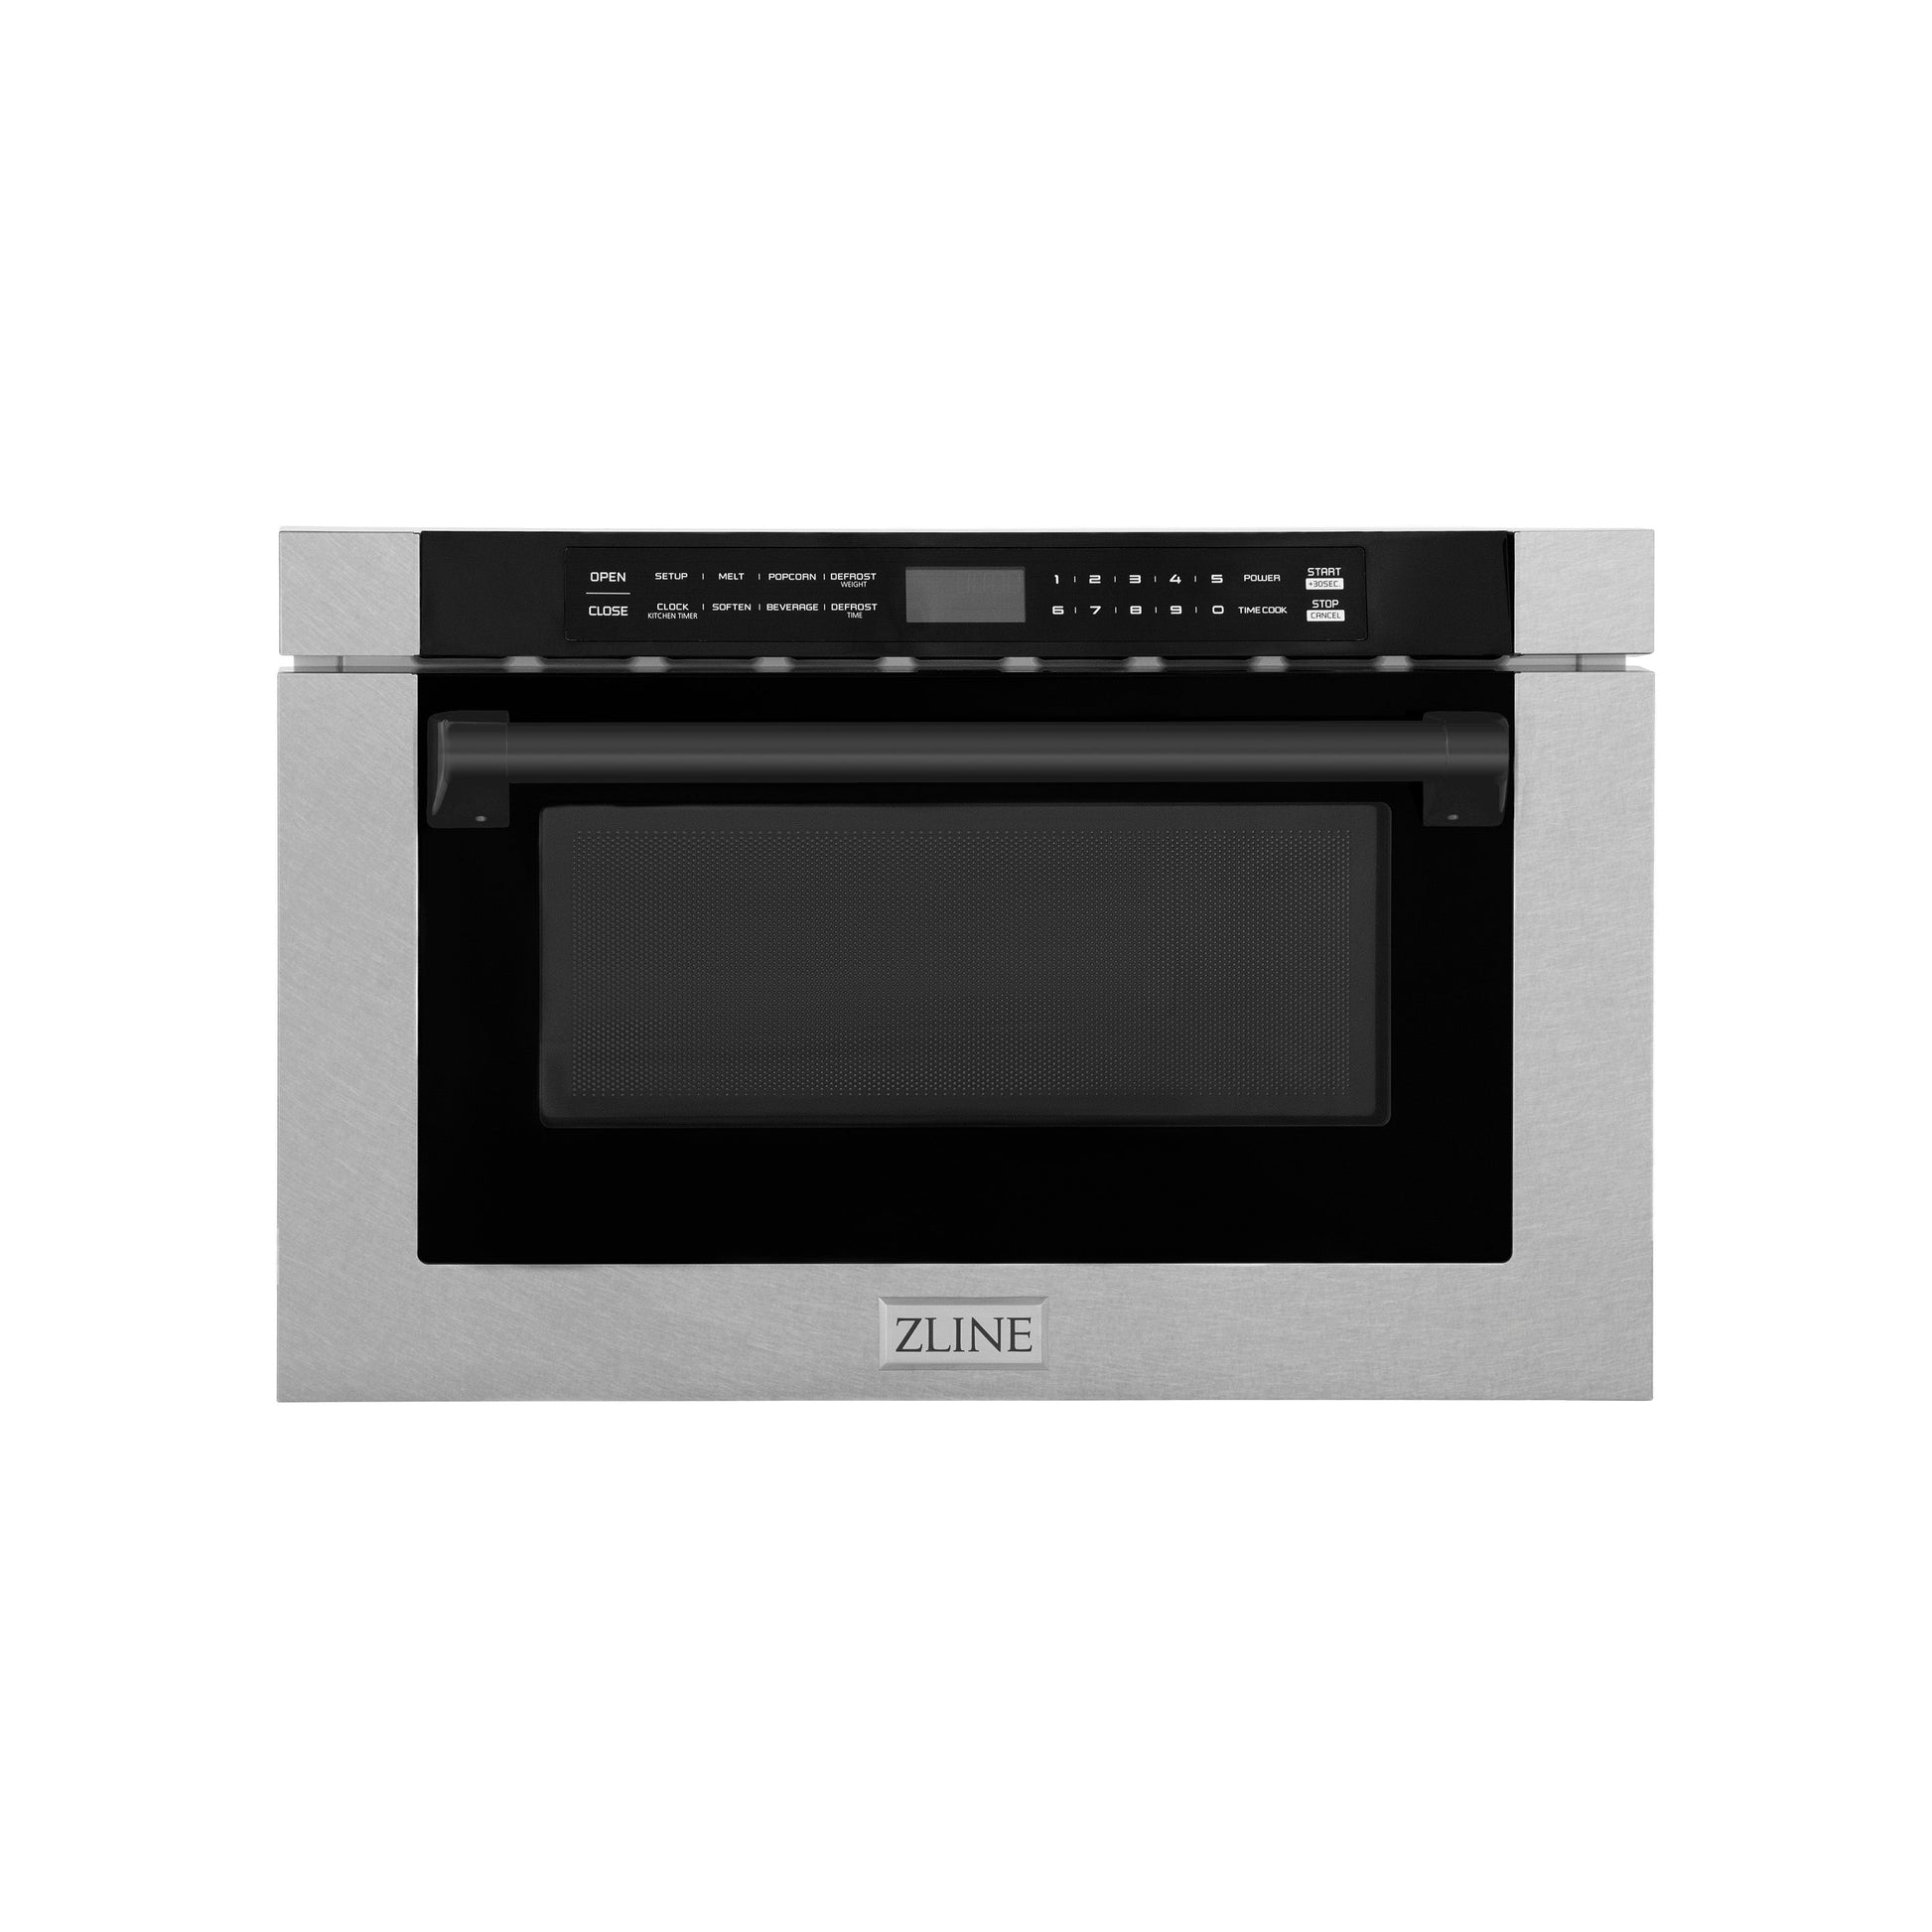 ZLINE Autograph Edition 24" Microwave - Fingerprint Resistant Stainless Steel with Traditional Handles and Accents